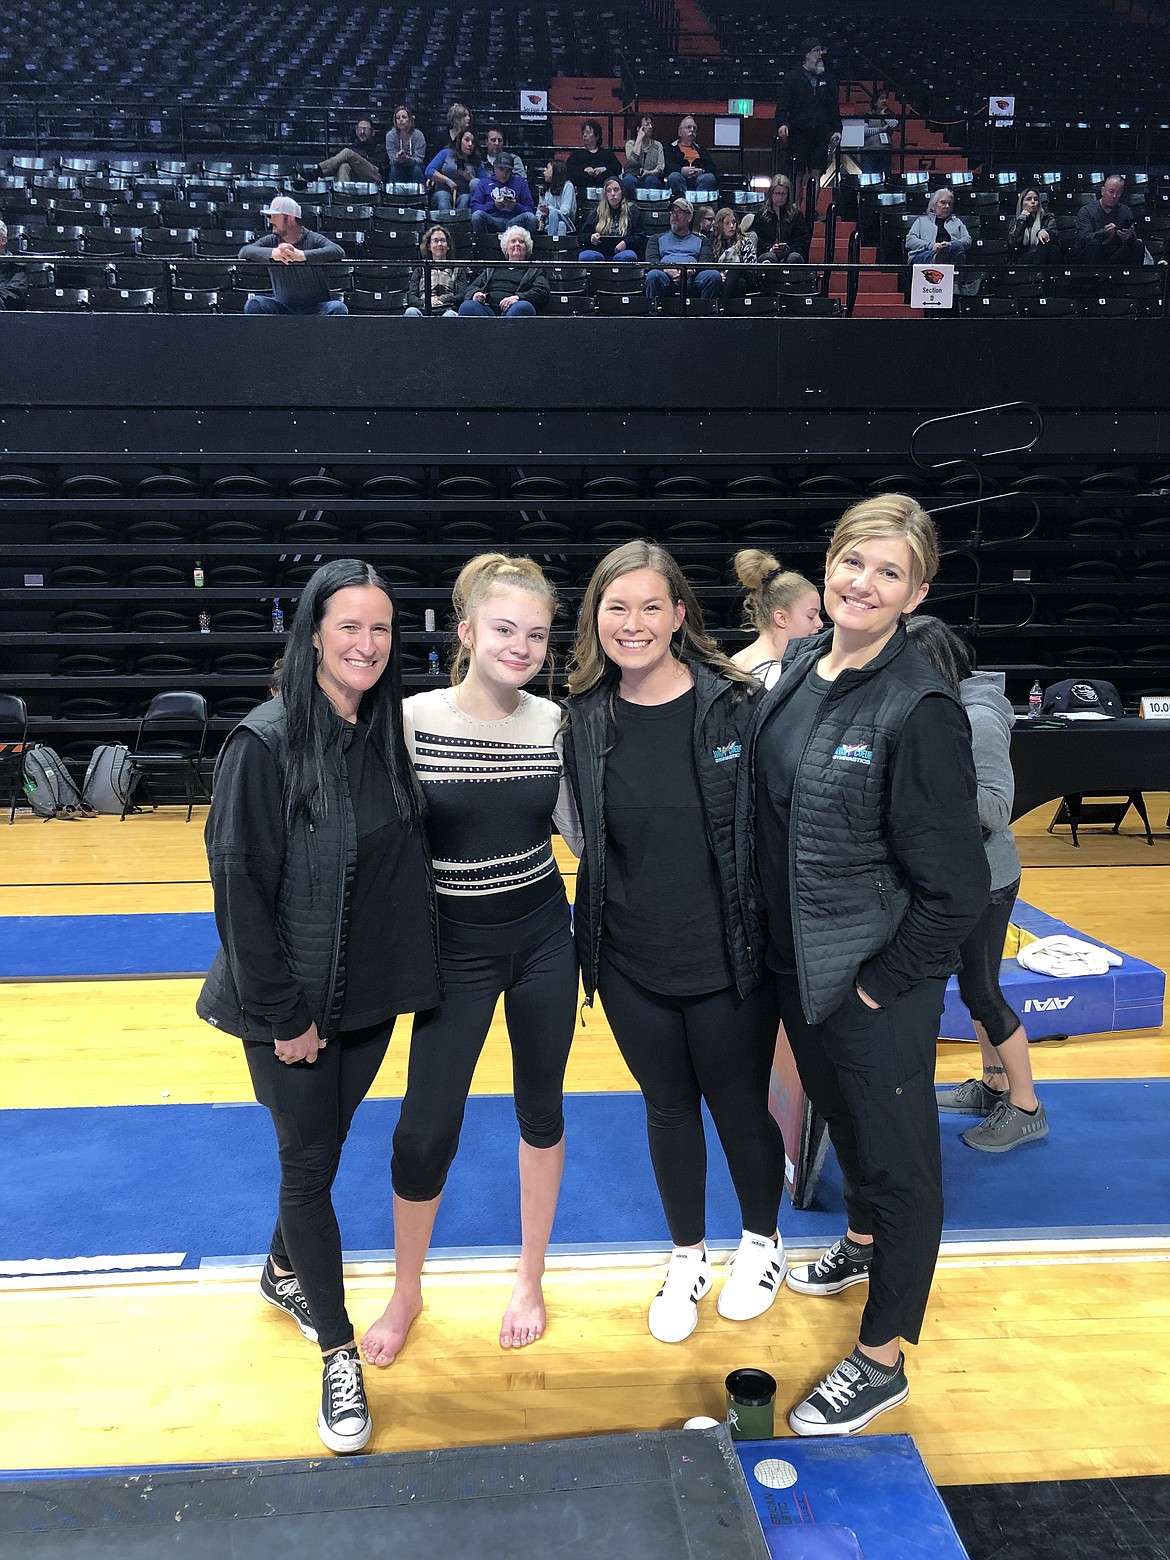 Courtesy photo
Avant Coeur Gymnastics in Corvallis, Ore., for the regional championships. From left is coach Lisa Adlard, Level 8 Mauren Rouse, and coaches Kelsey Kato and Barbara DePasquale.